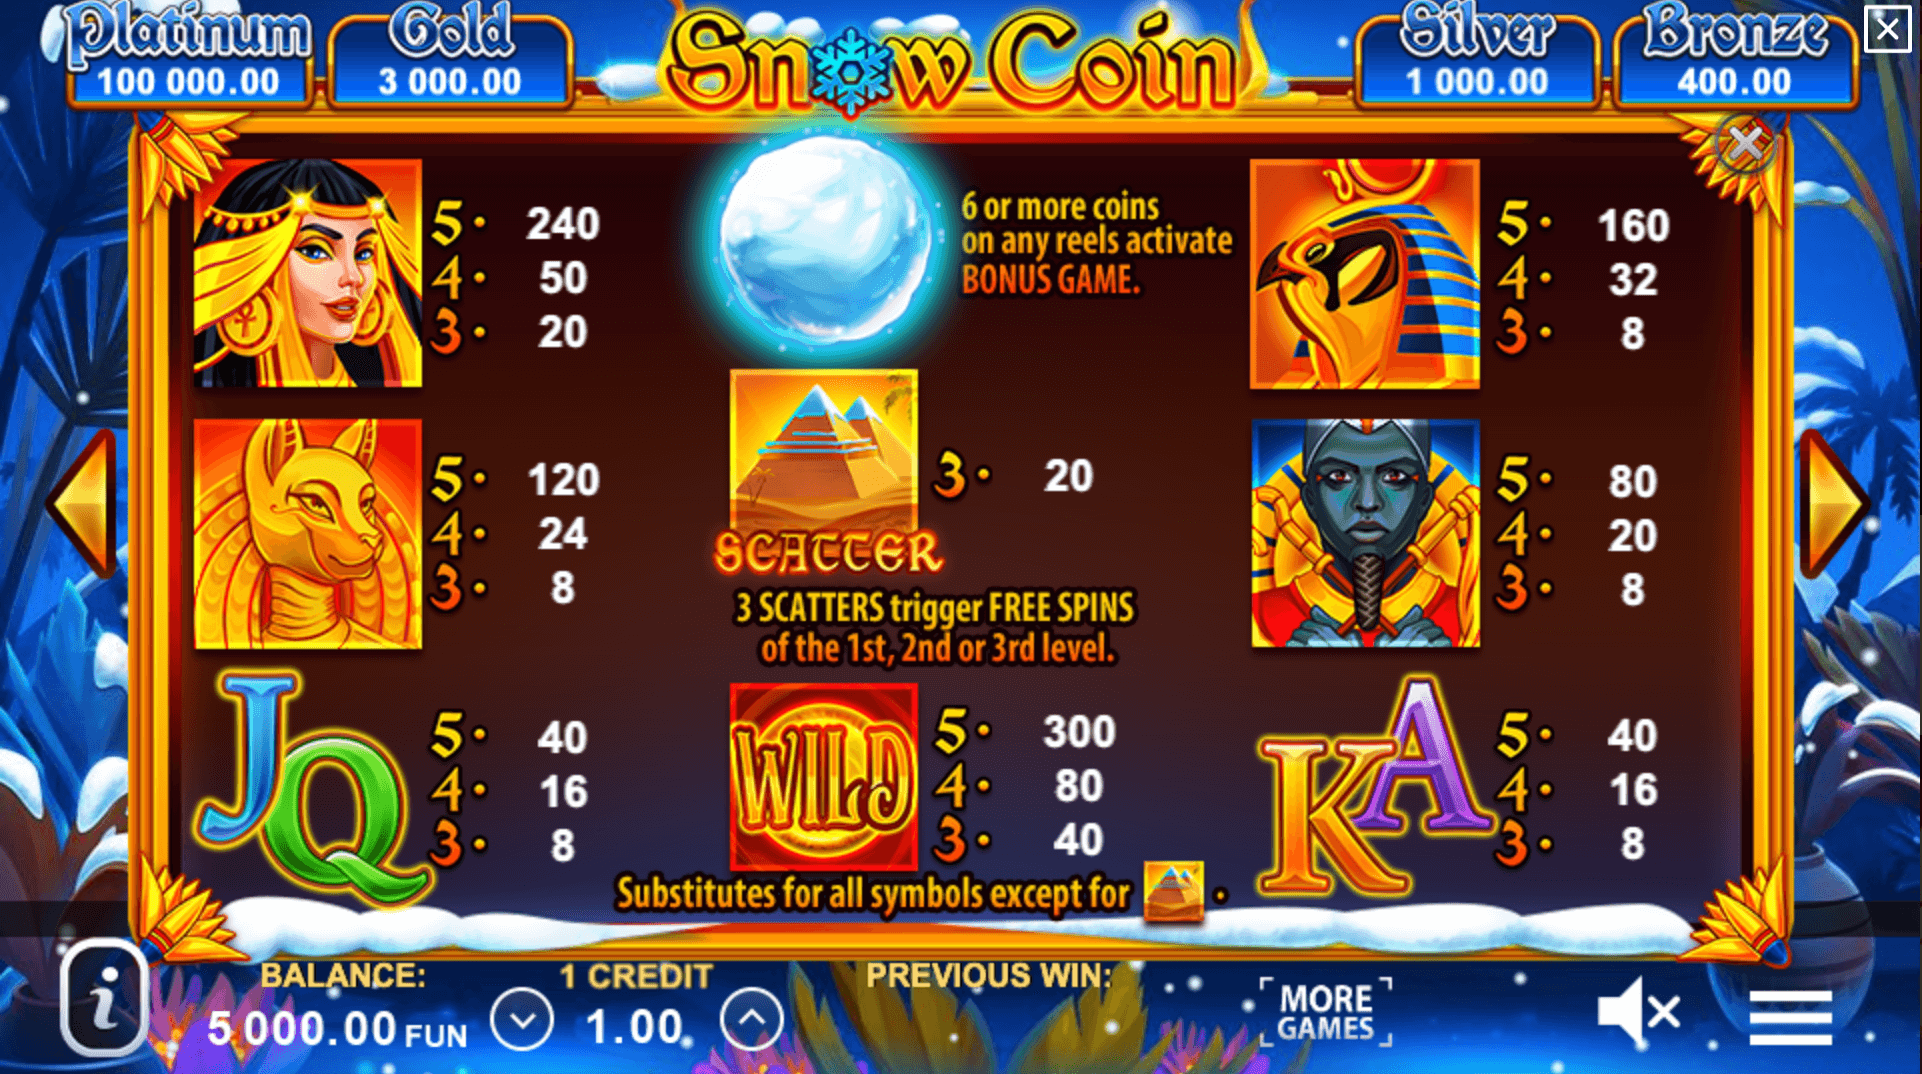 Snow Coin: Hold The Spin Spel proces